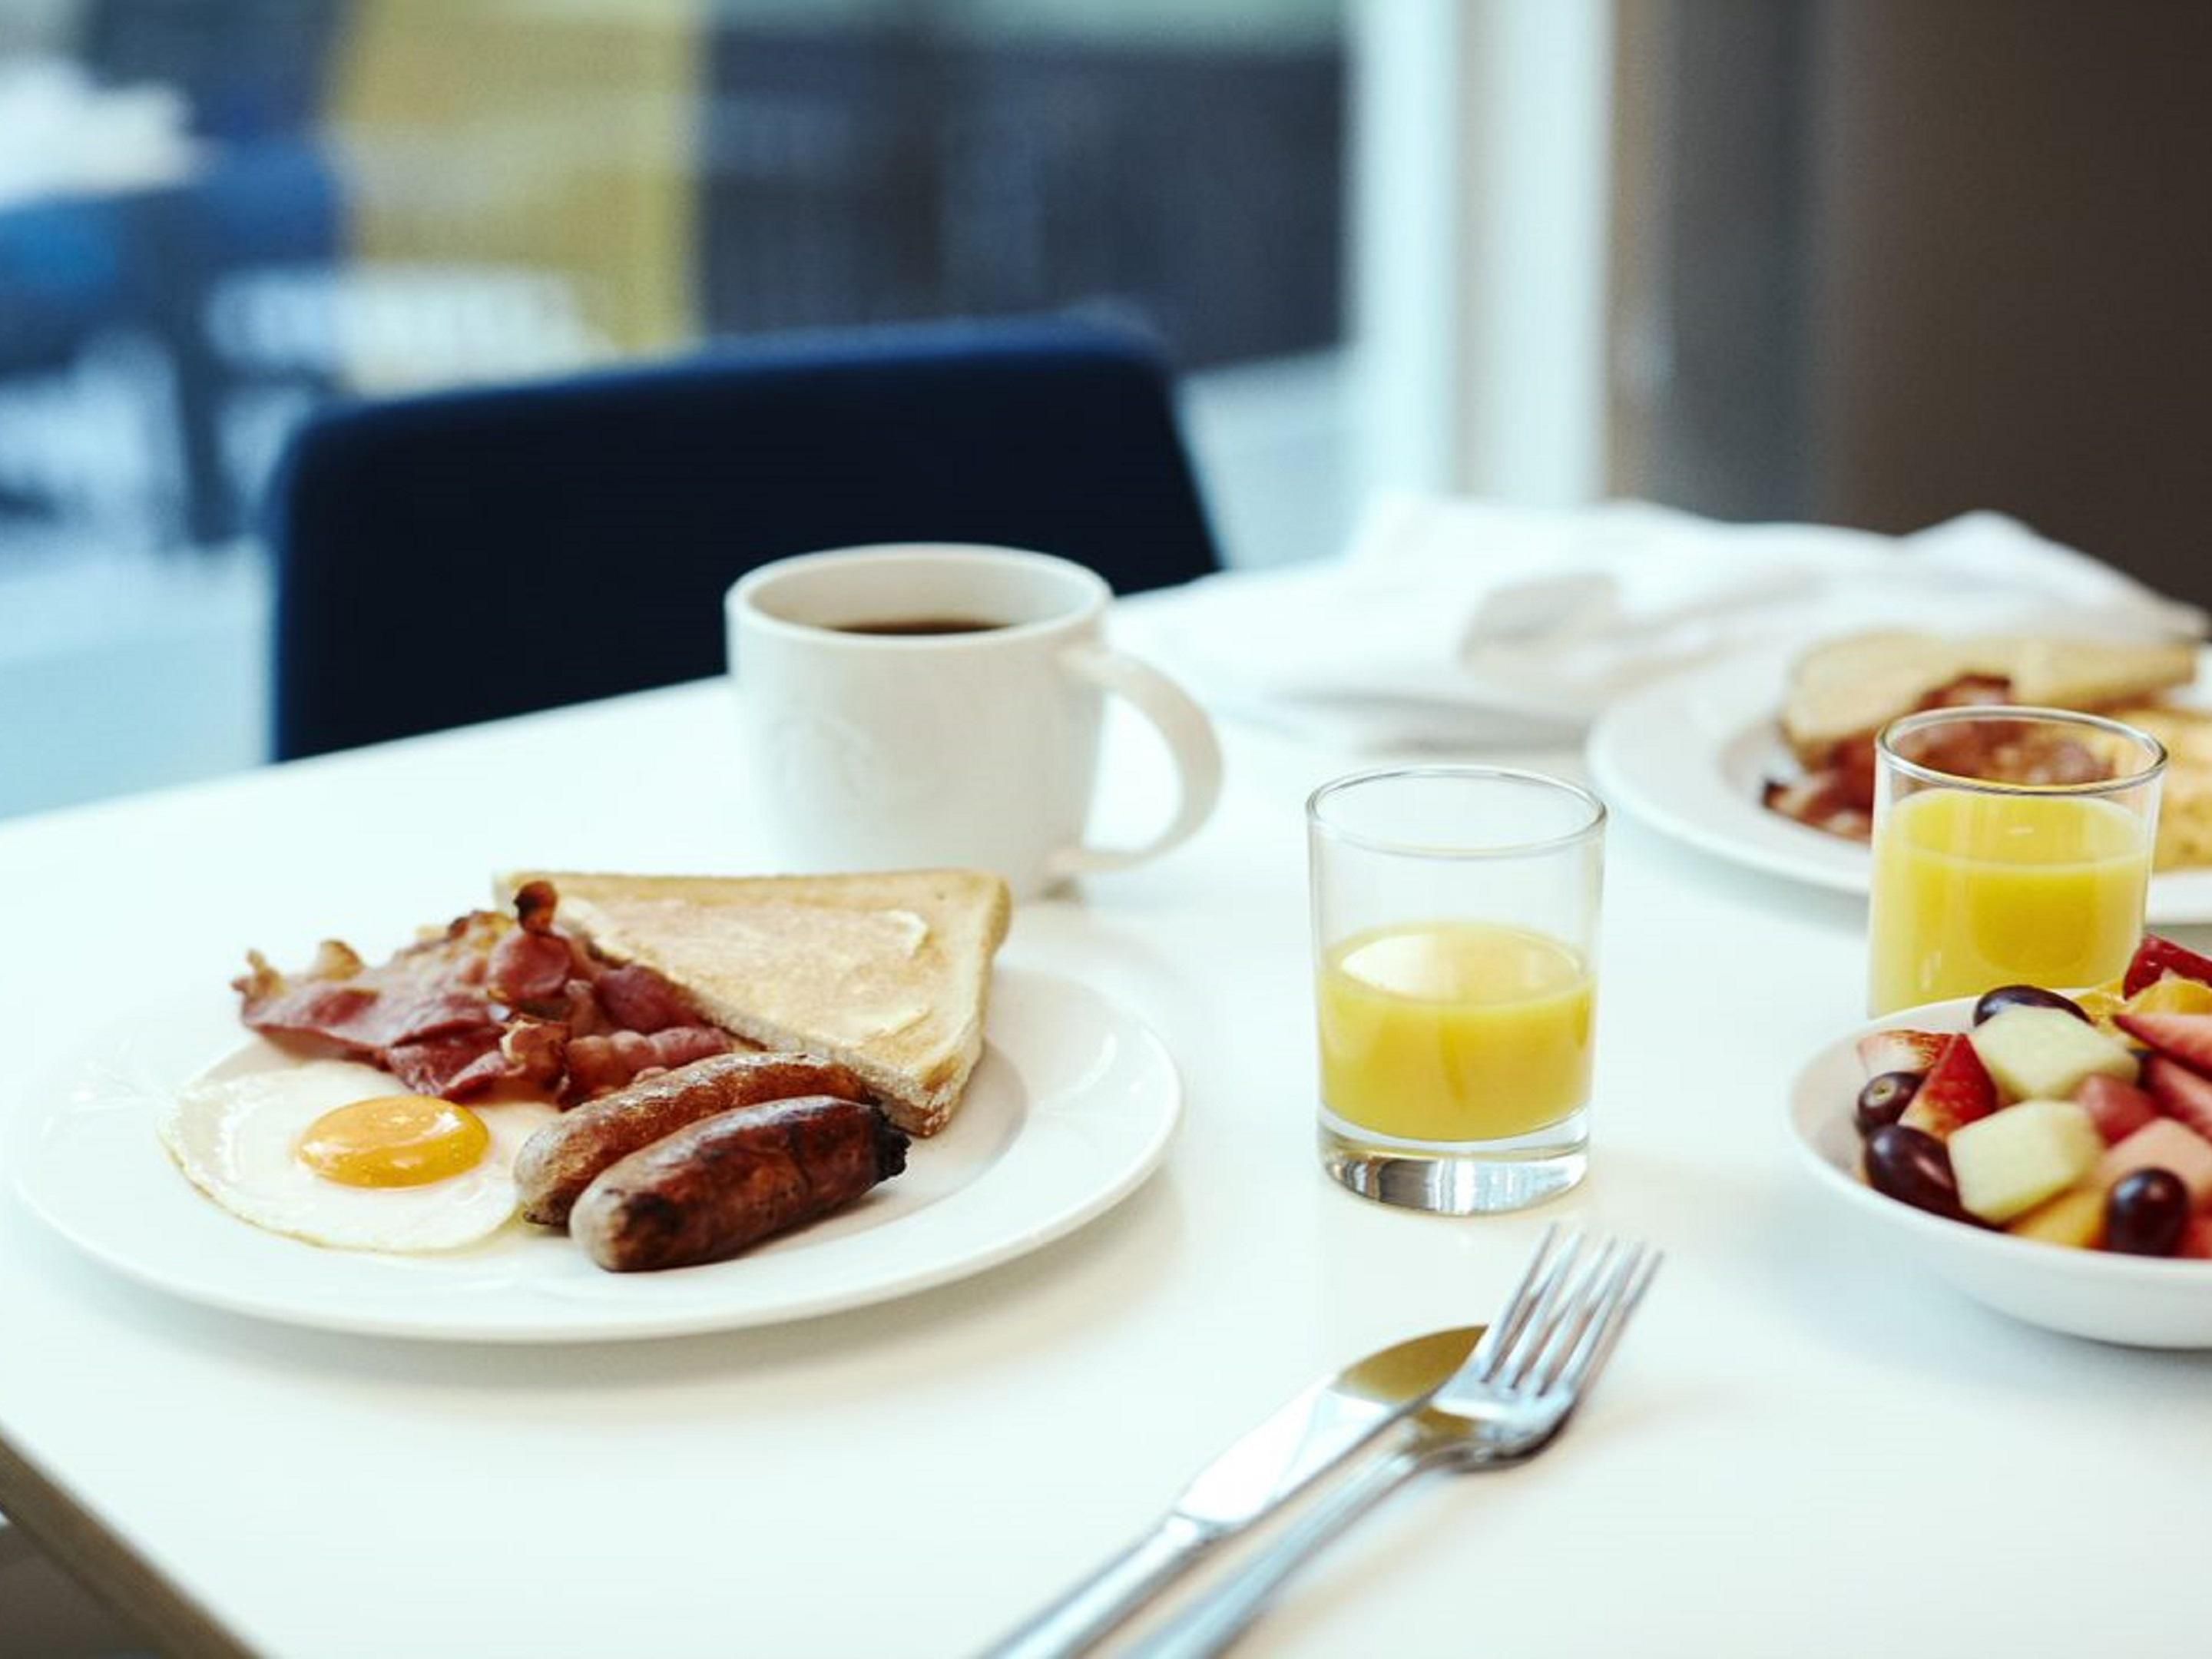 Start the day with our breakfast served daily, featuring a range of delicious hot and cold items -- sure to please everyone. Mon - Fri 6:30am - 10:30am and  Sat - Sun 7:00am - 11:00am.